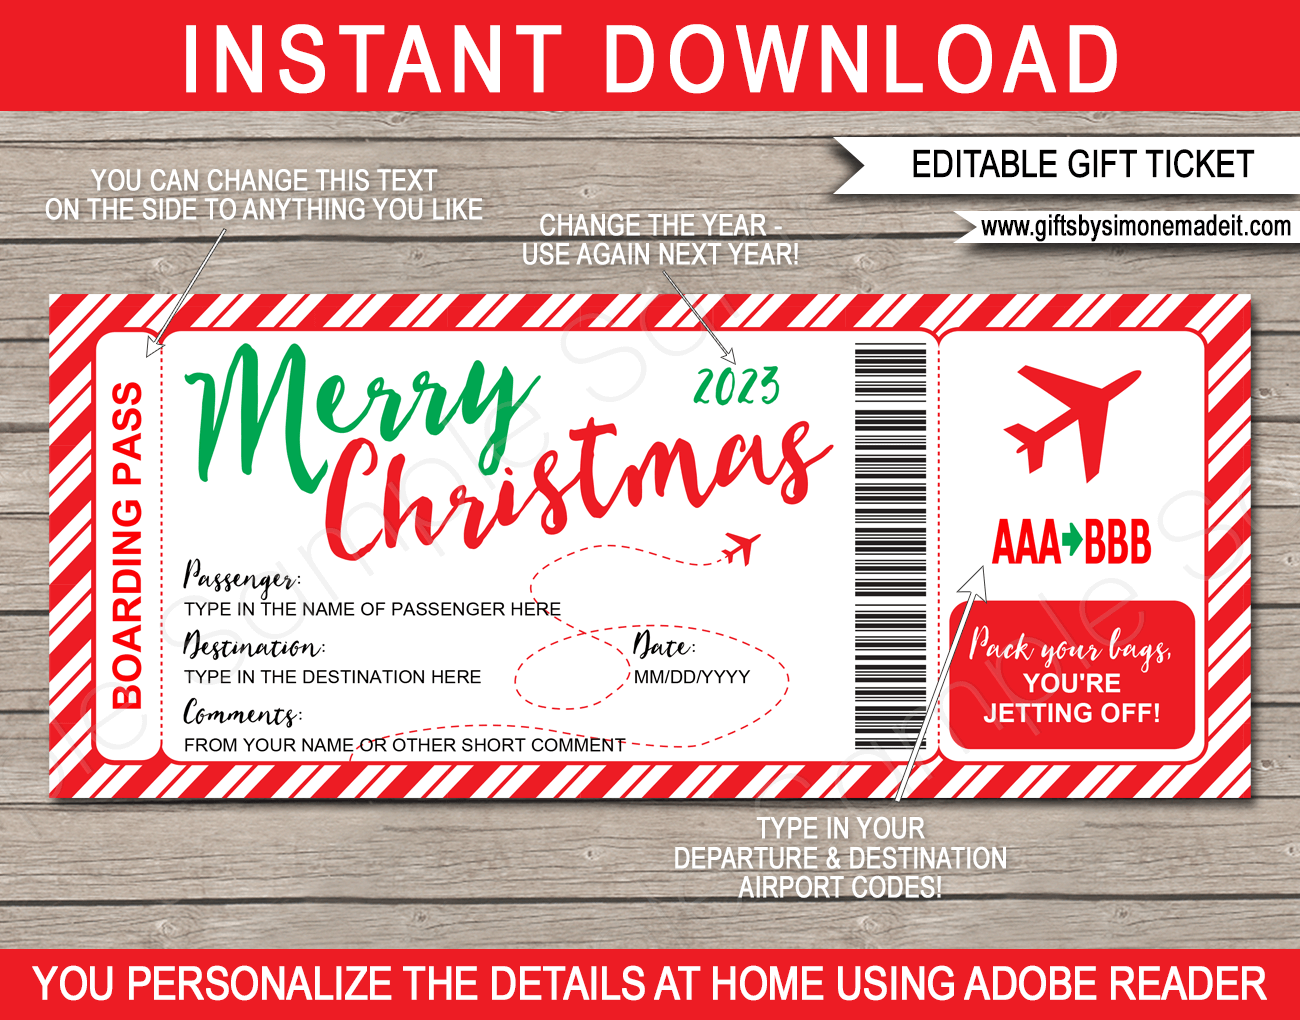 Printable Christmas Plane Boarding Pass Gift Template | Fake Plane Gift Ticket | Surprise Trip Reveal | Flight, Holiday, Getaway, Vacation | INSTANT DOWNLOAD via giftsbysimonemadeit.com